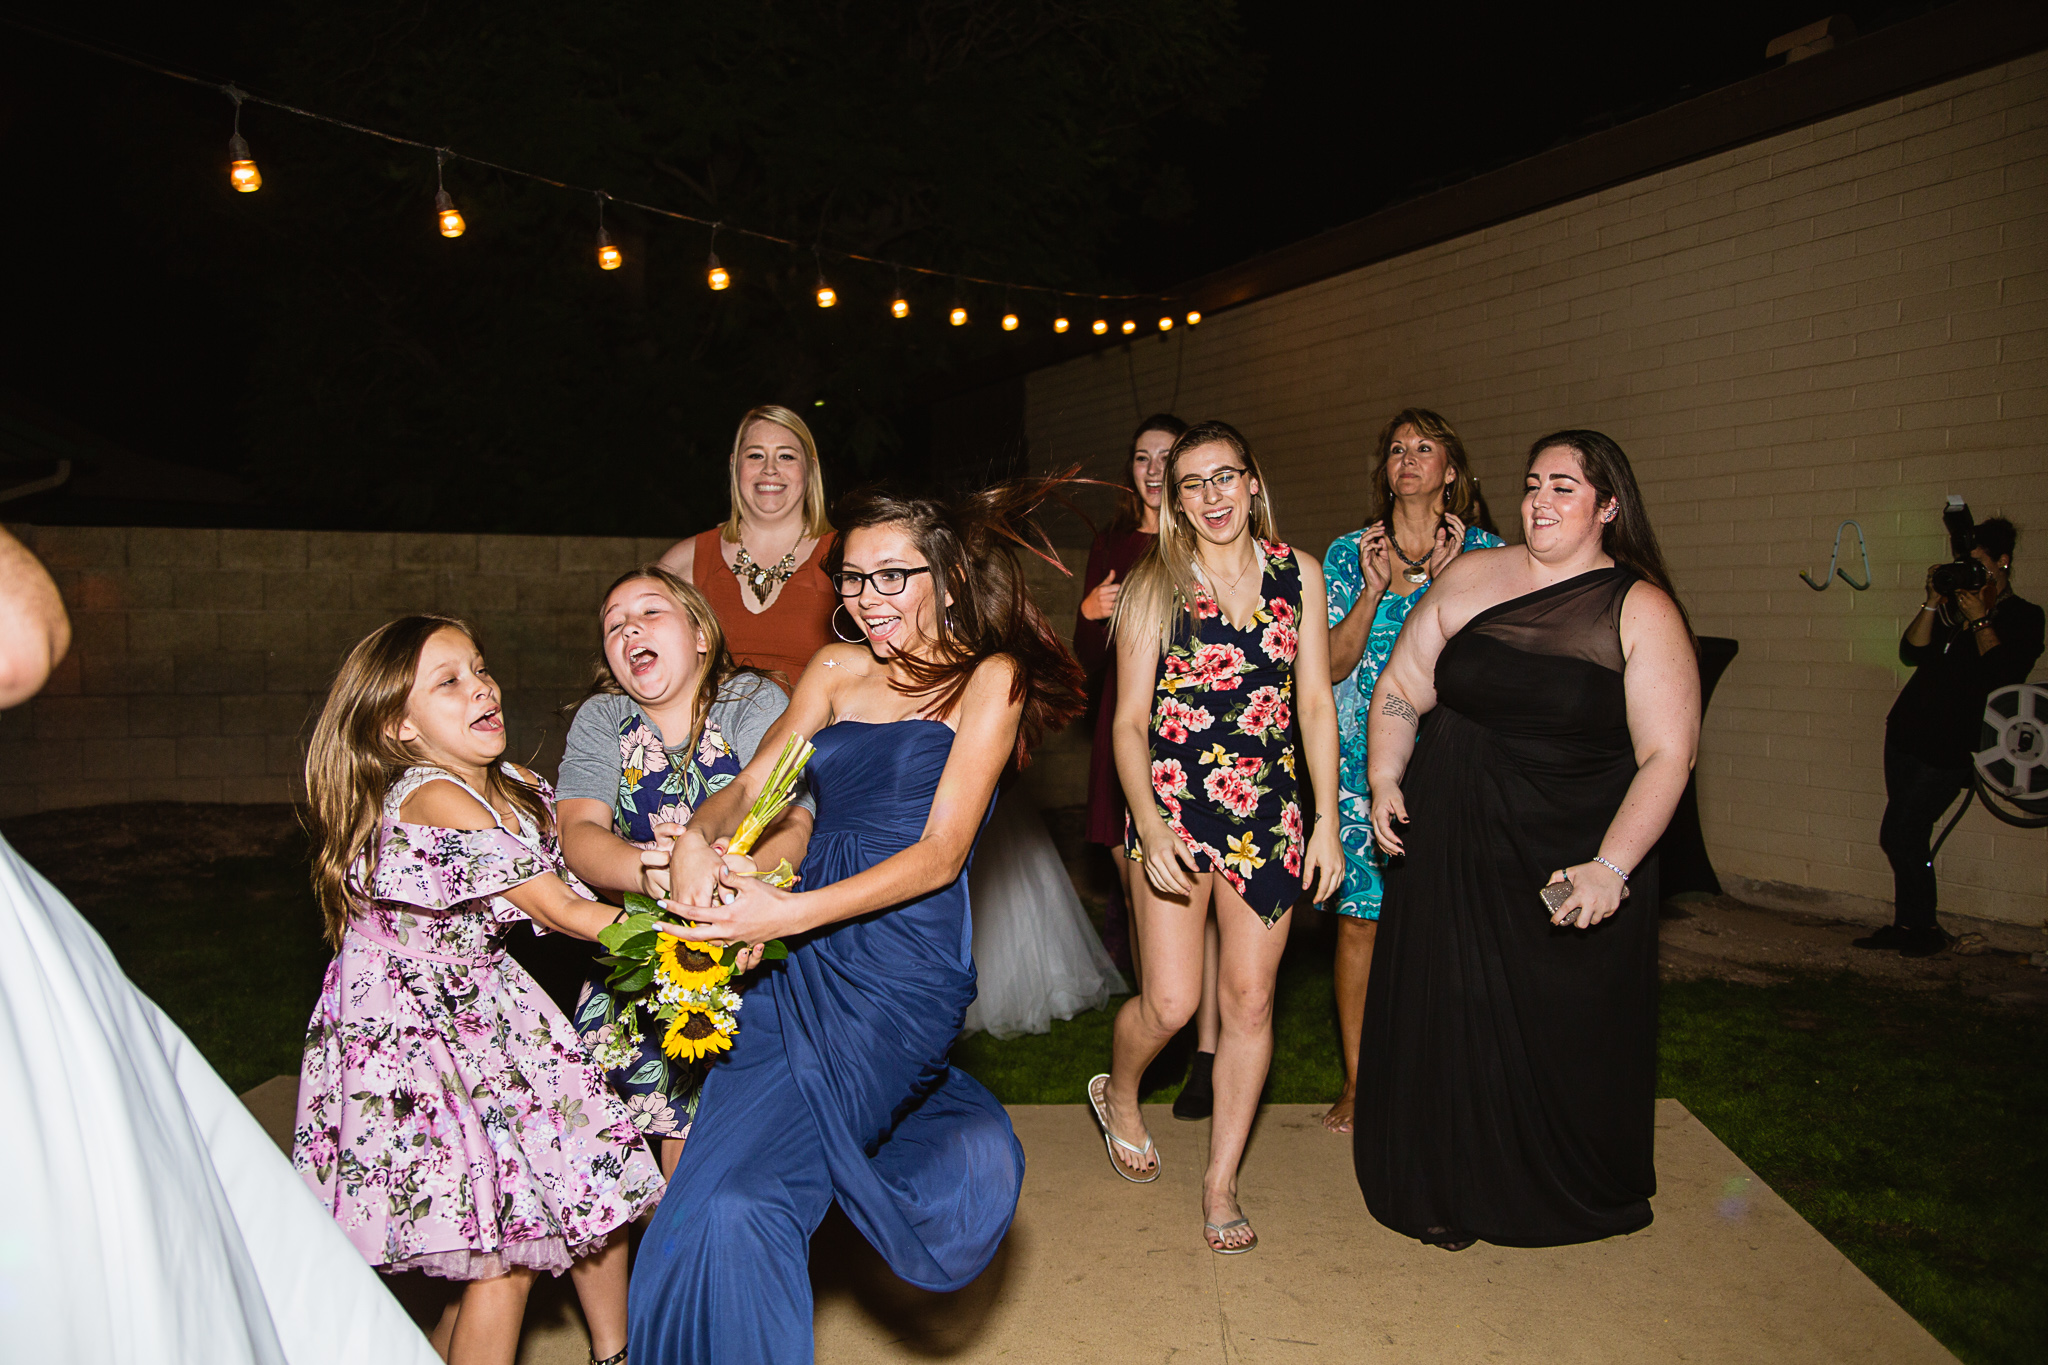 Guests catching the bouquet at a wedding reception.